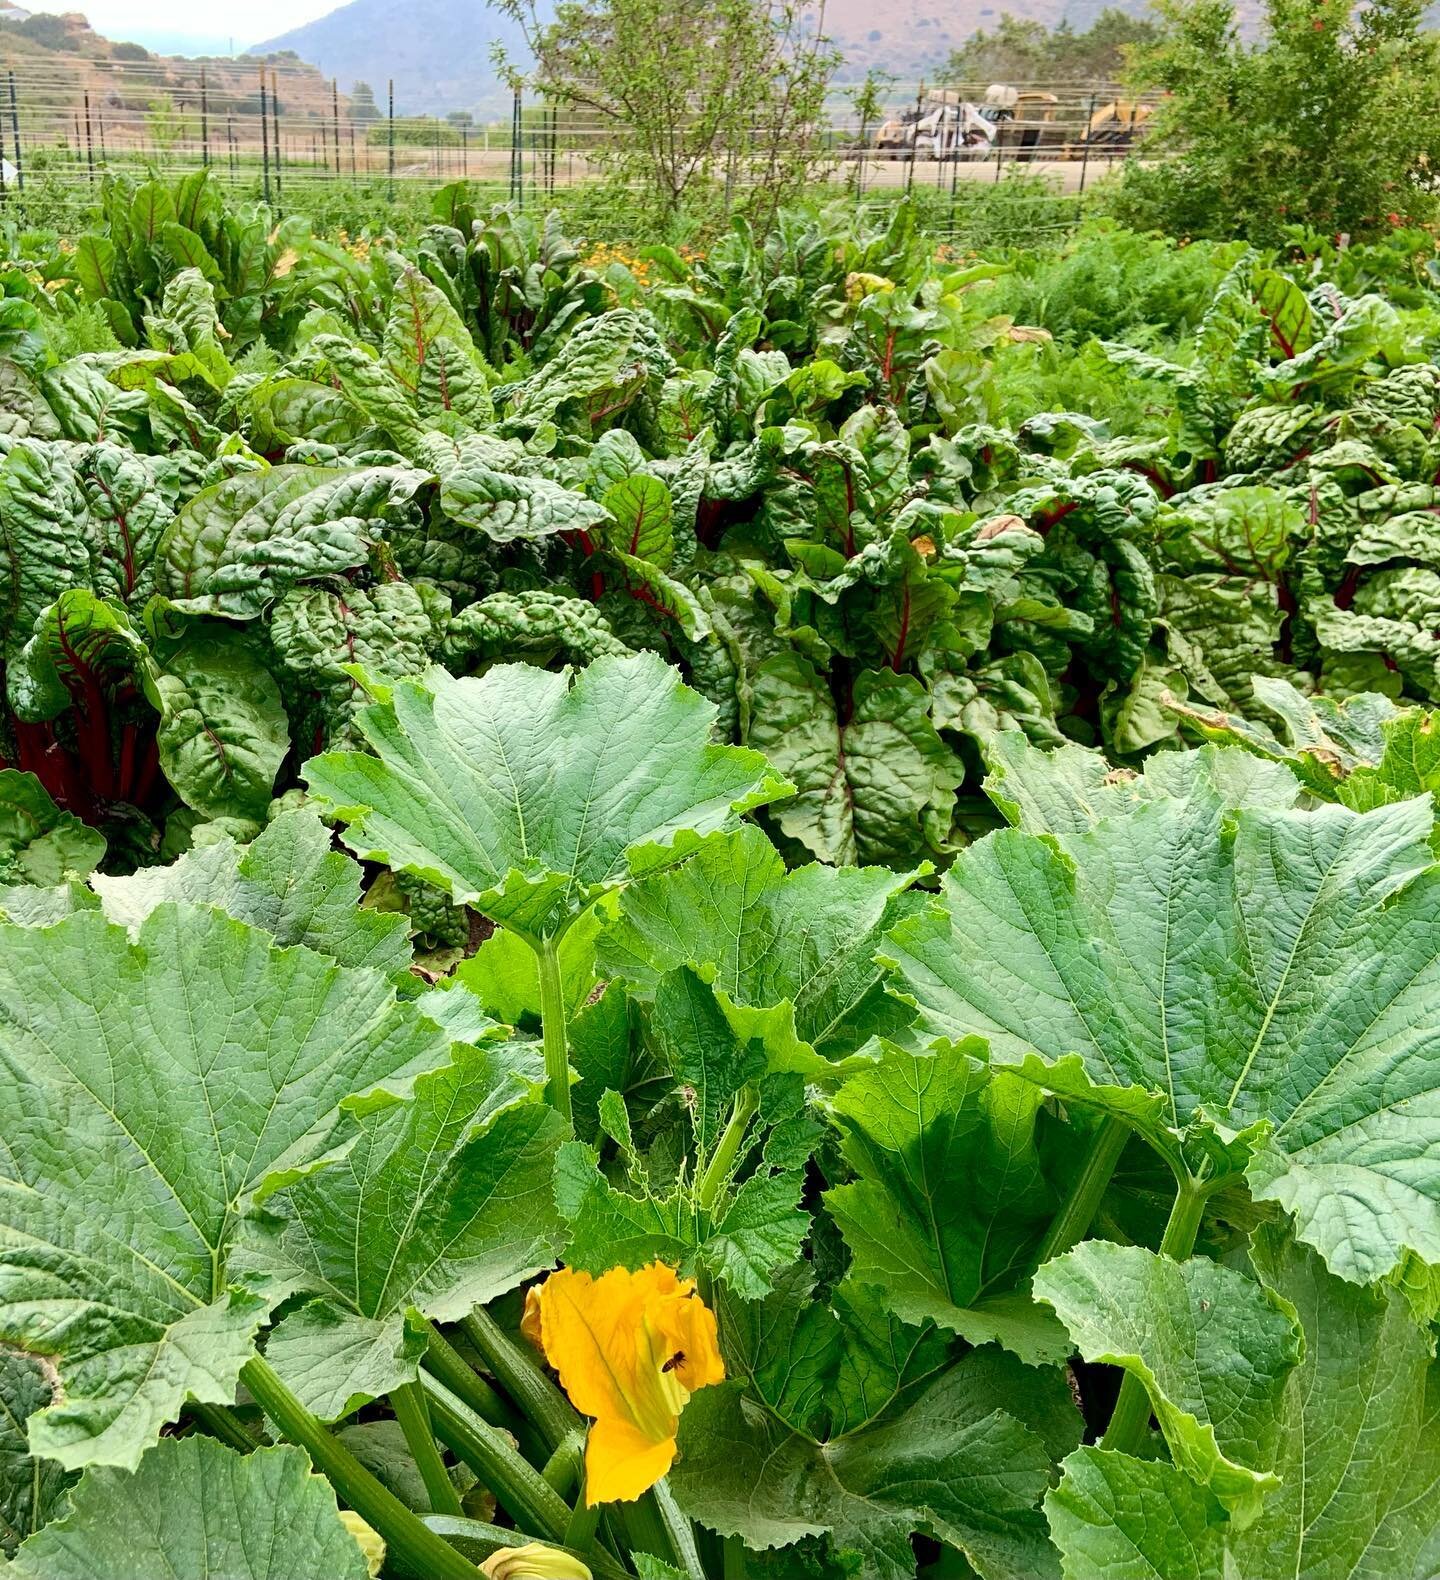 Come visit our drive thru market tomorrow from 2:30-4! We love this season of transition into summer vegetables. We will have a limited quantity of our season&rsquo;s first zucchini and sunflower bouquets right in time for Mother&rsquo;s Day!